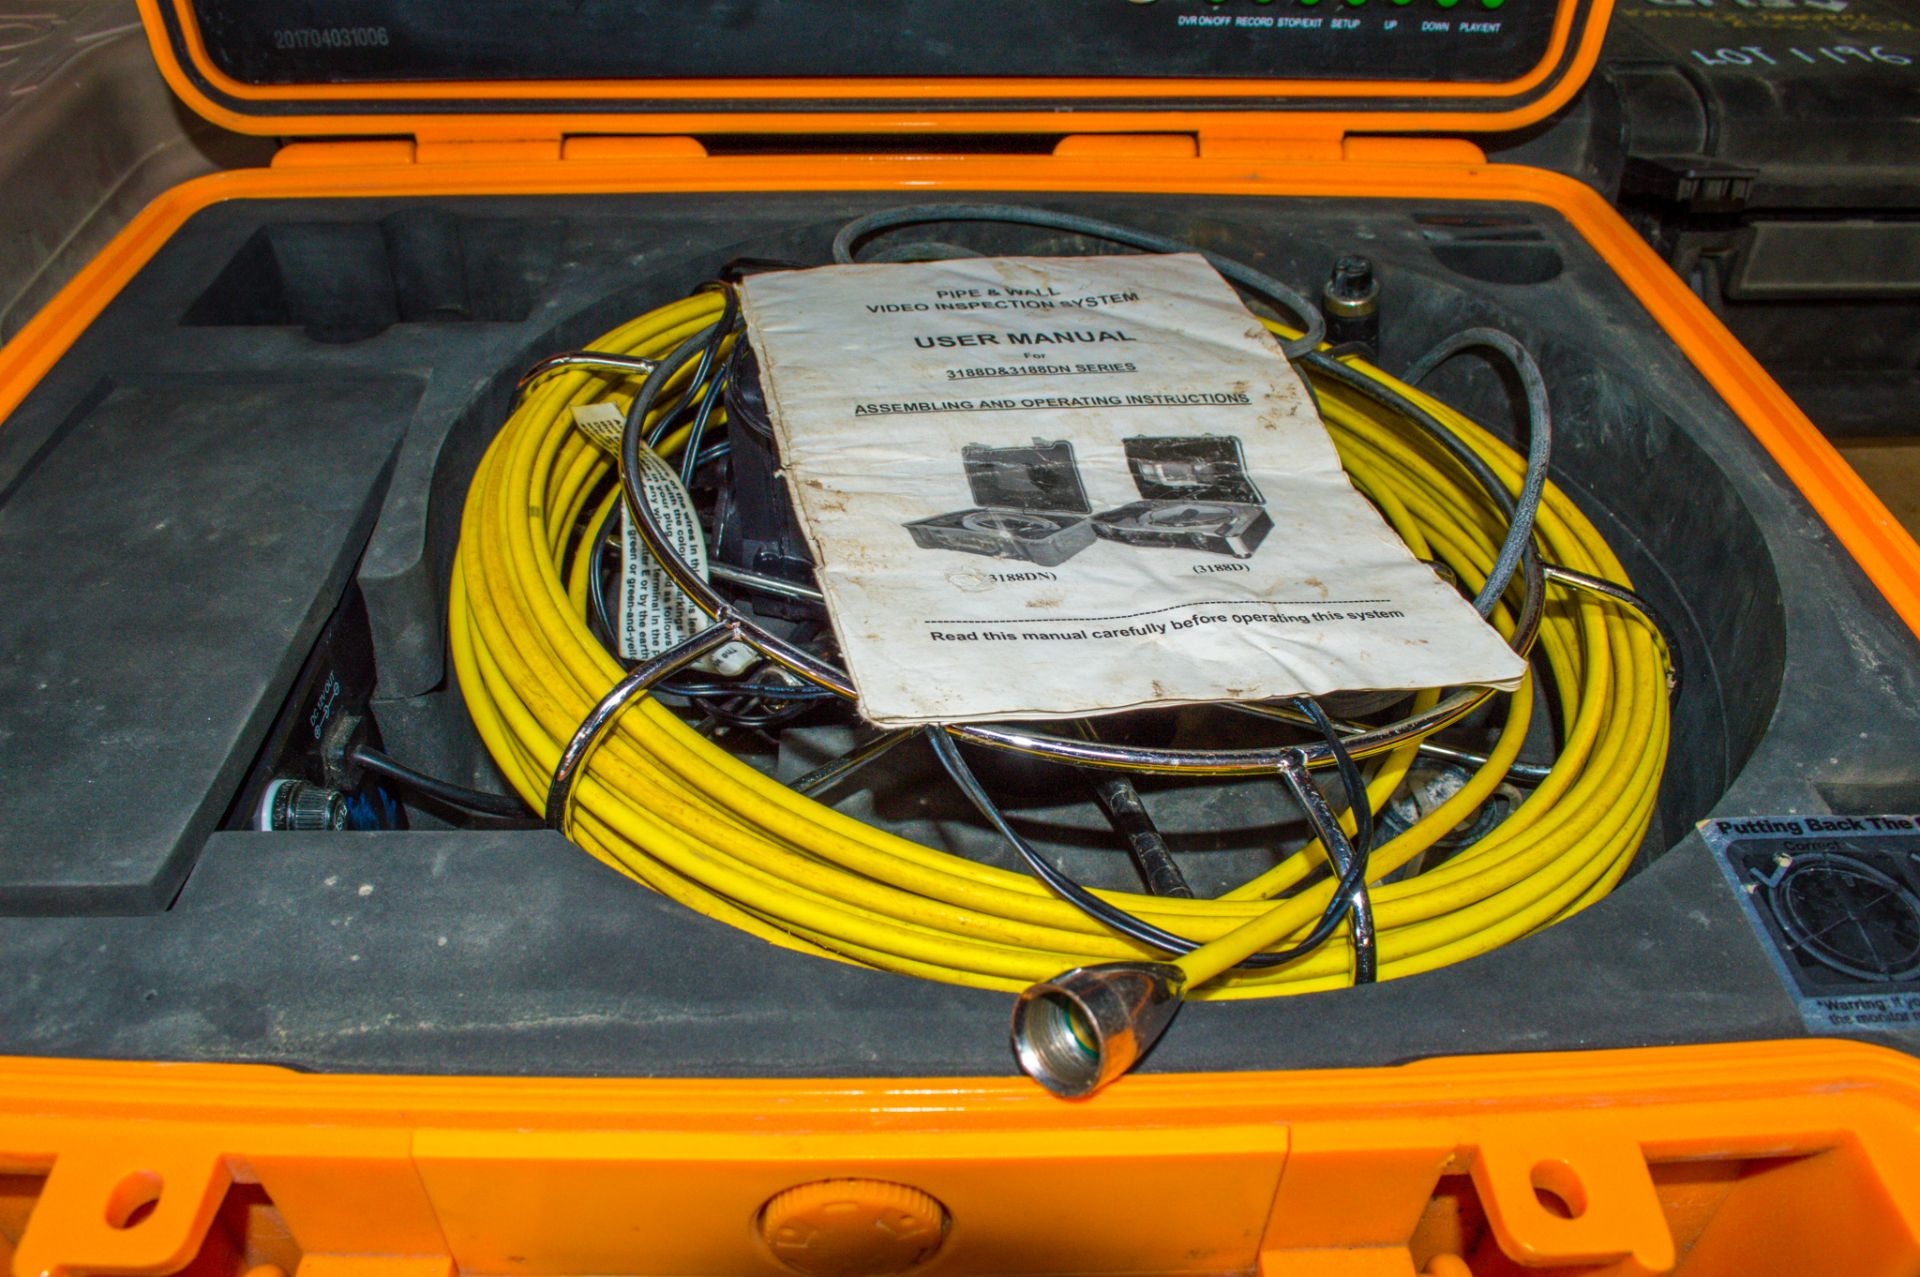 Cable reel pipe & wall video inspection system c/w carry case B3310007 ** Damaged ** - Image 2 of 2